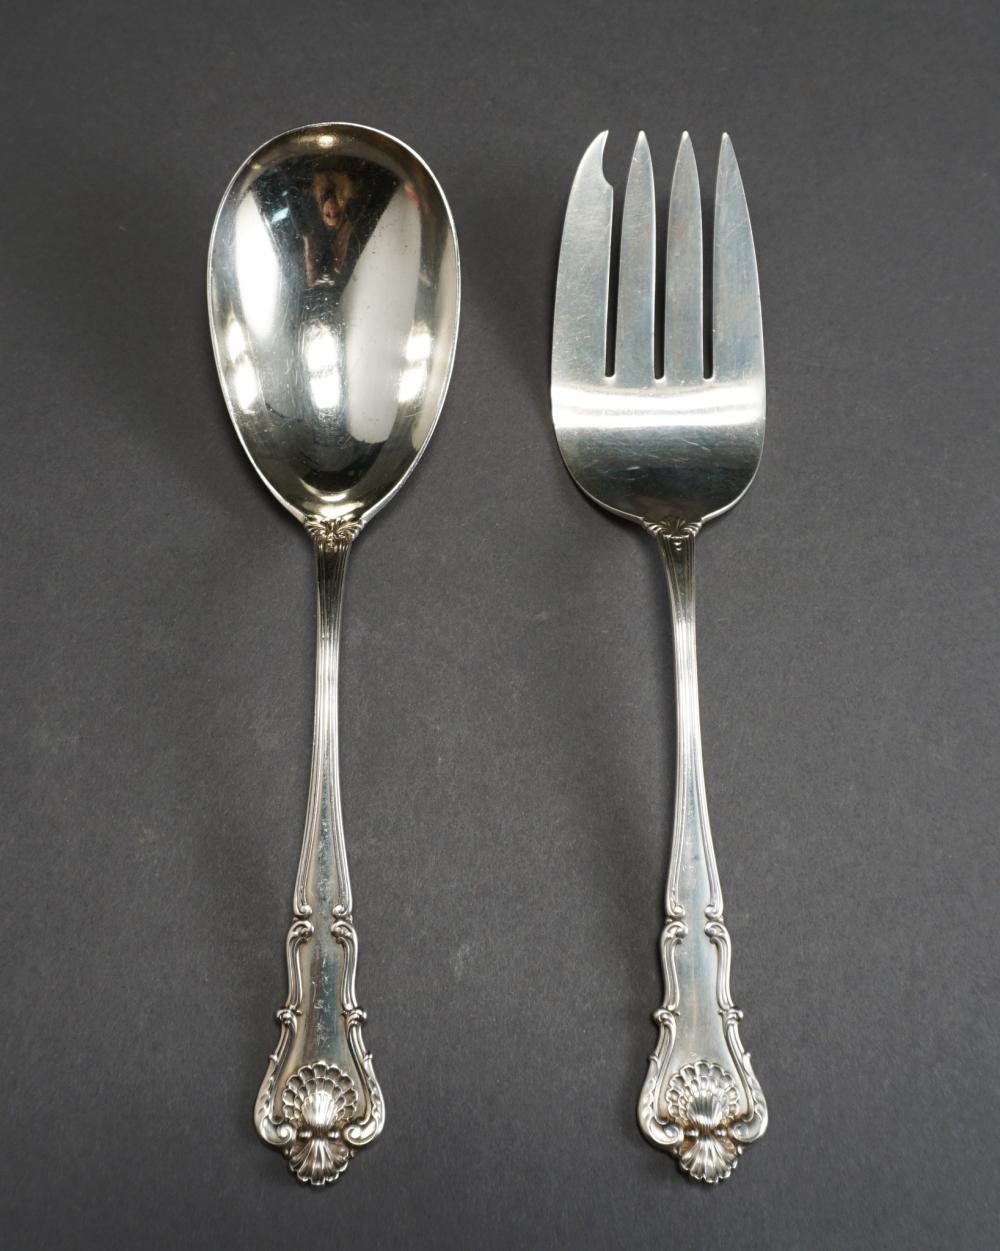 DURGIN STERLING TWO-PIECE SALAD